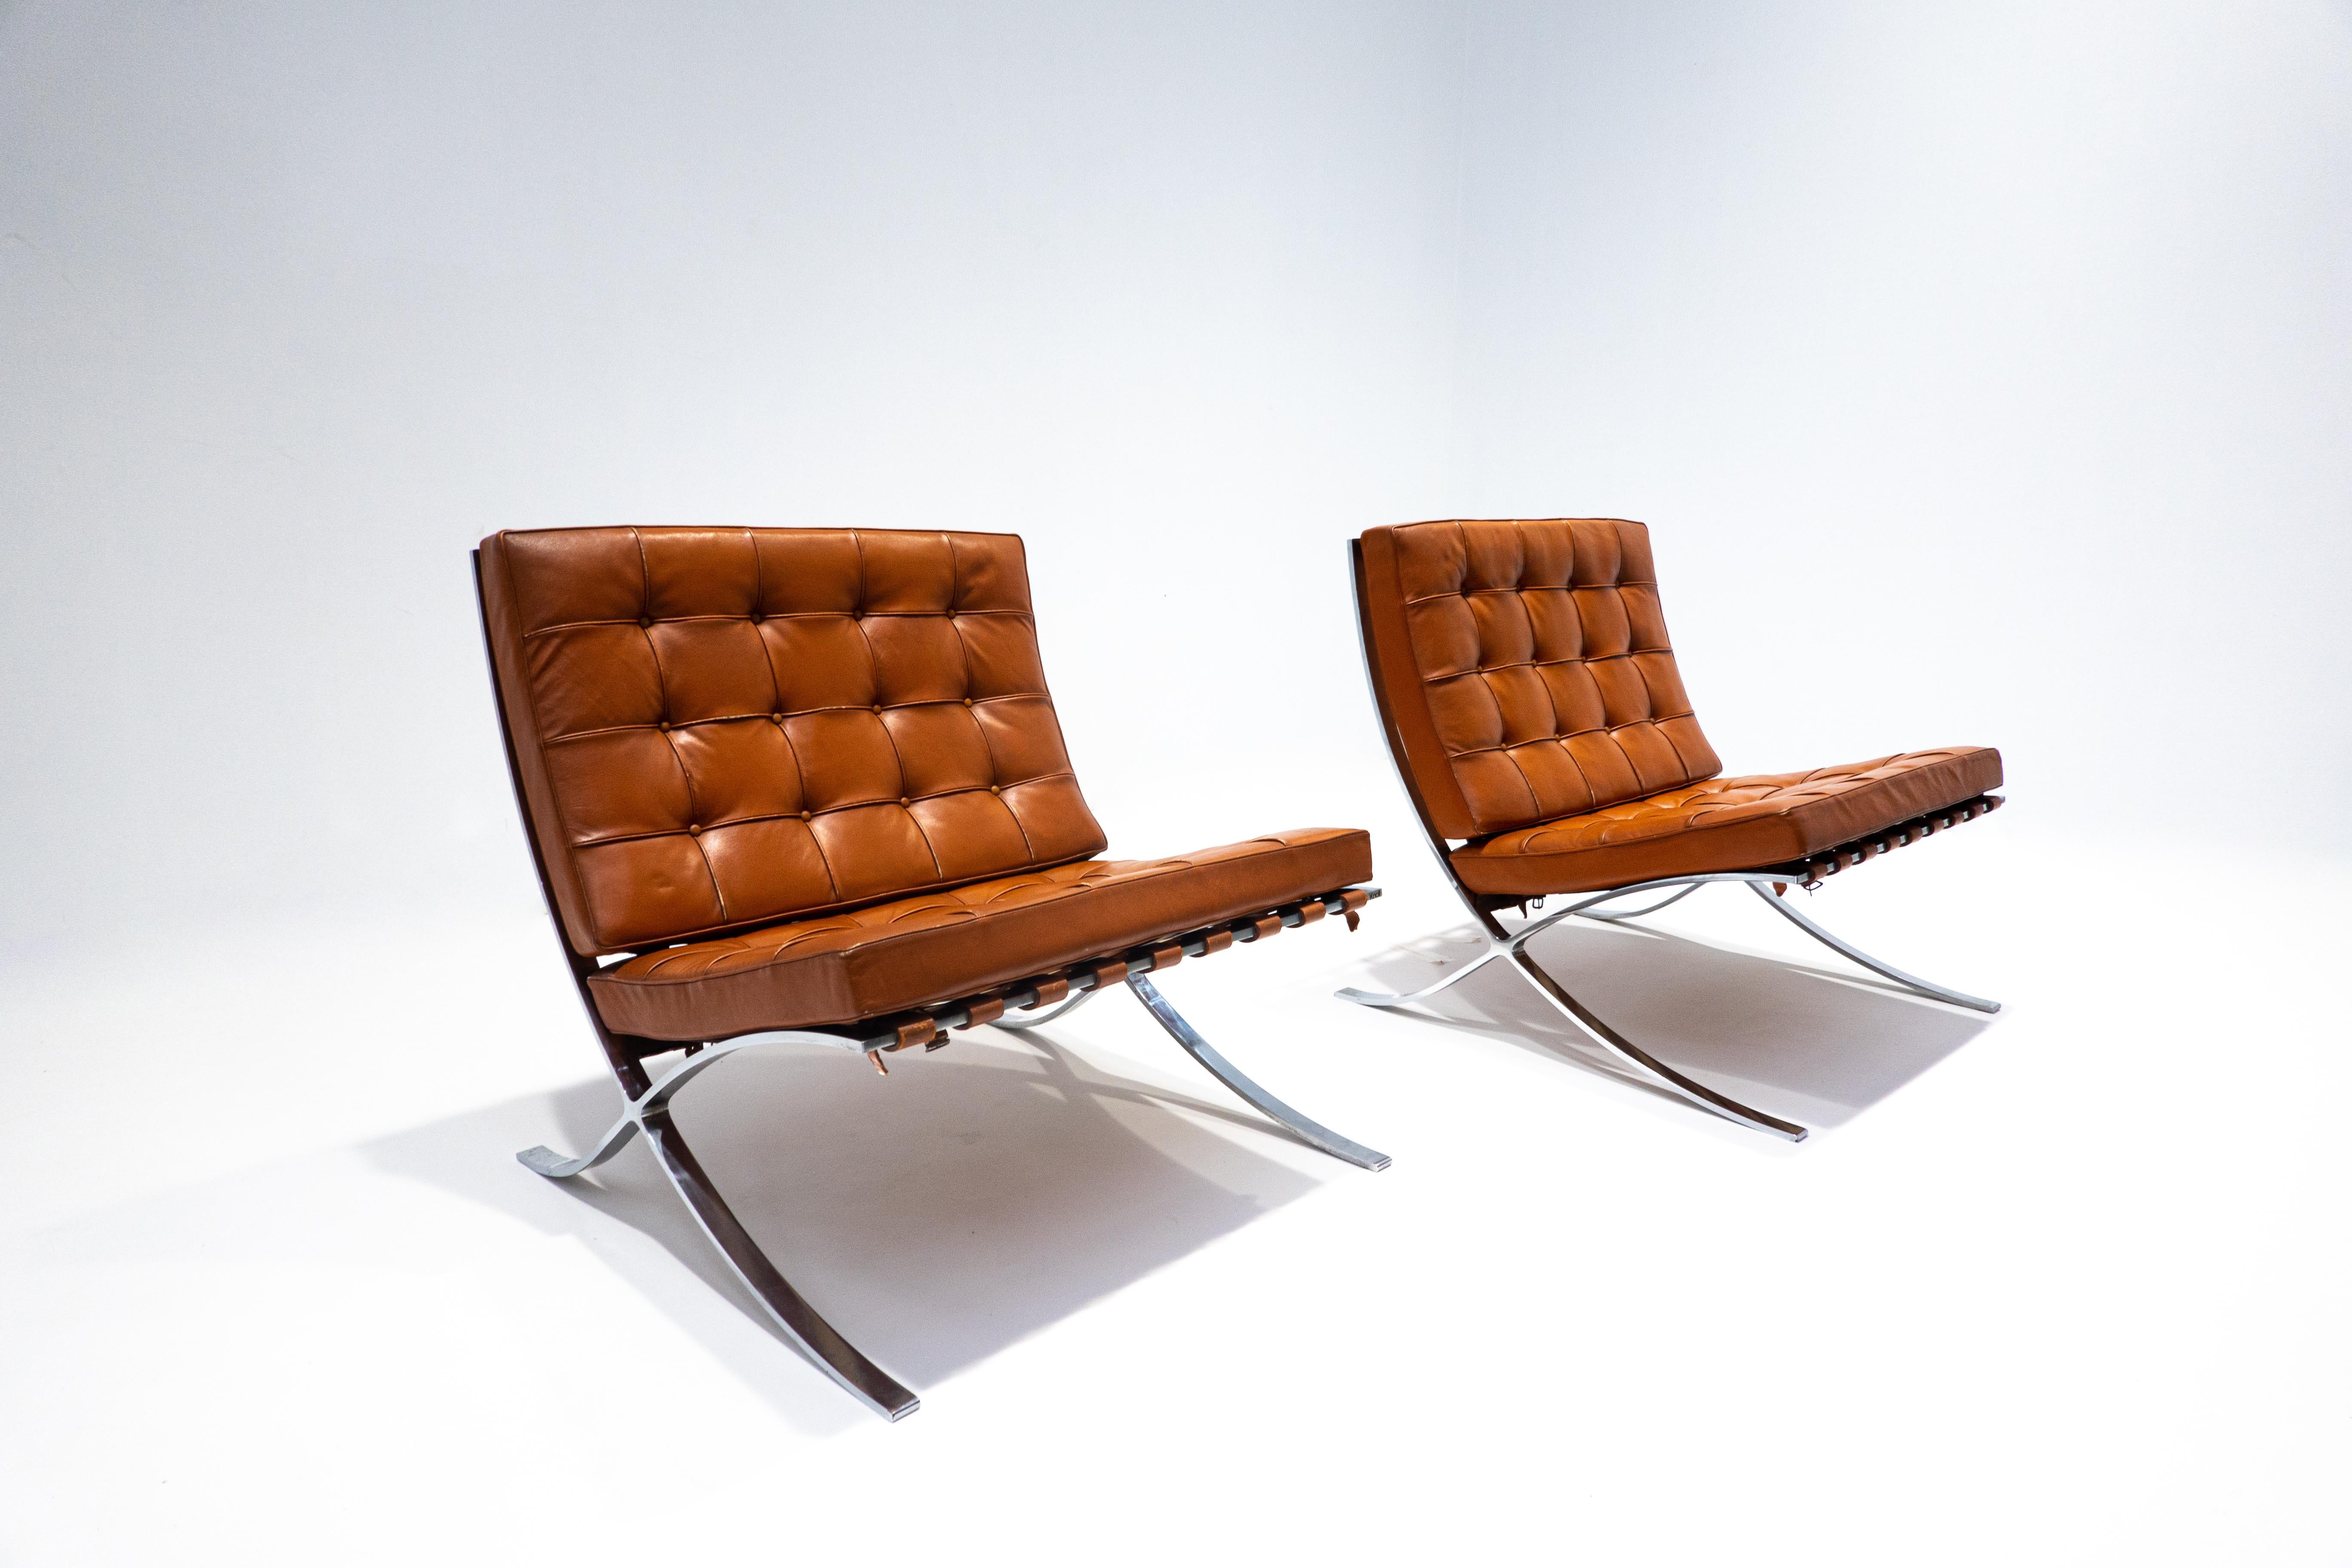 Pair of Cognac leather Barcelona chairs with ottoman by Mies Van Der Rohe for Knoll, 1960s.